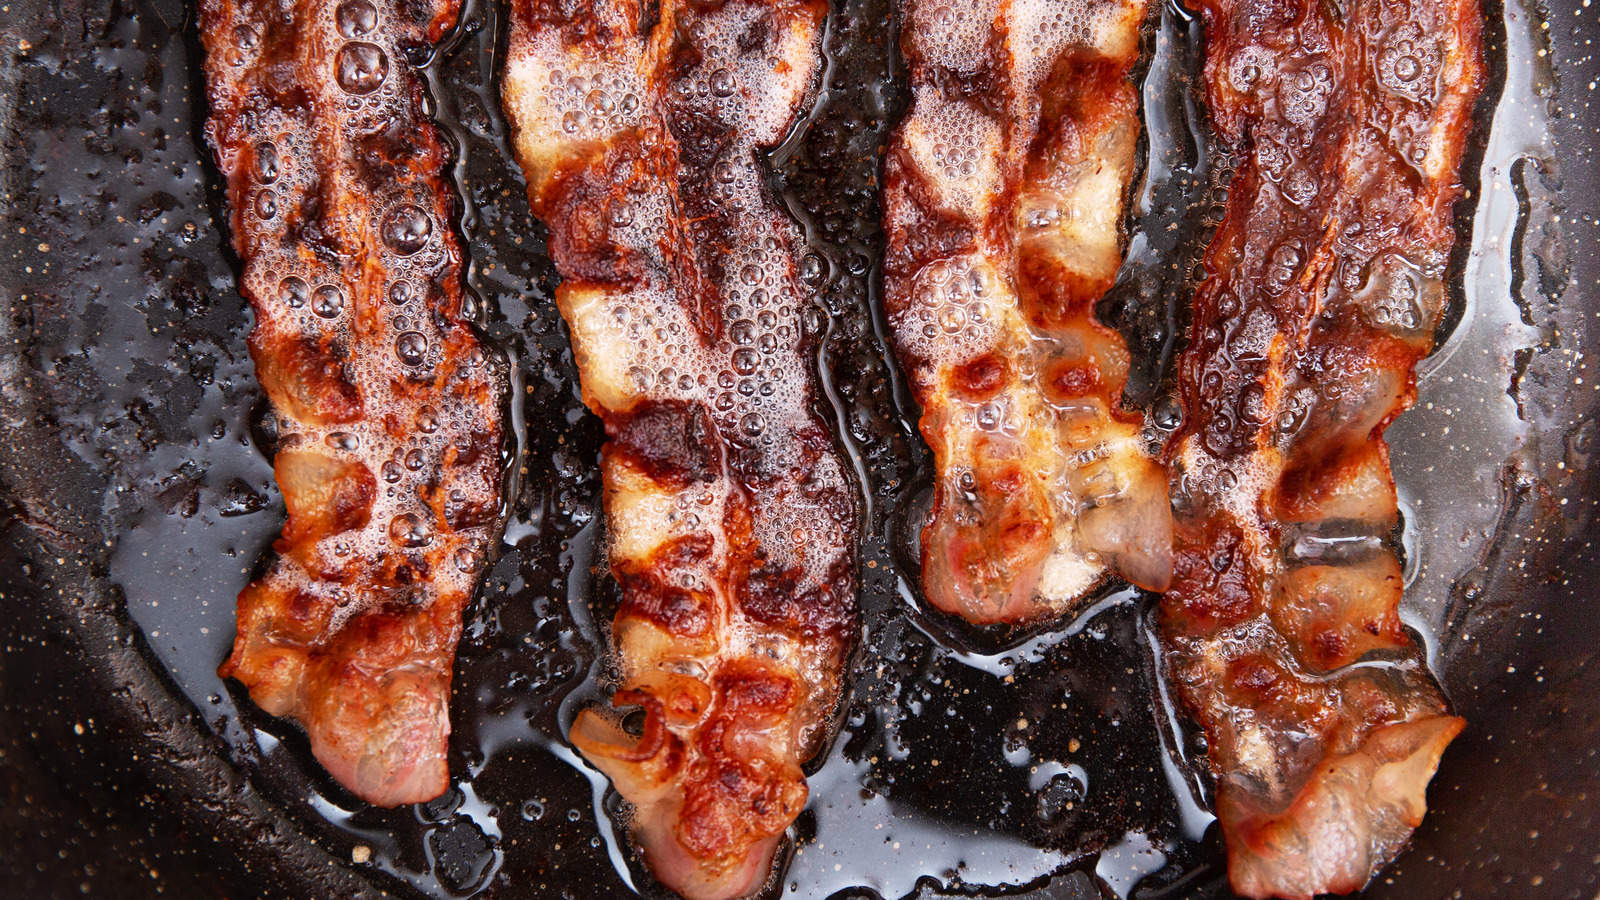 True Primal - Baking Bacon In The Oven: How To Collect Bacon Grease